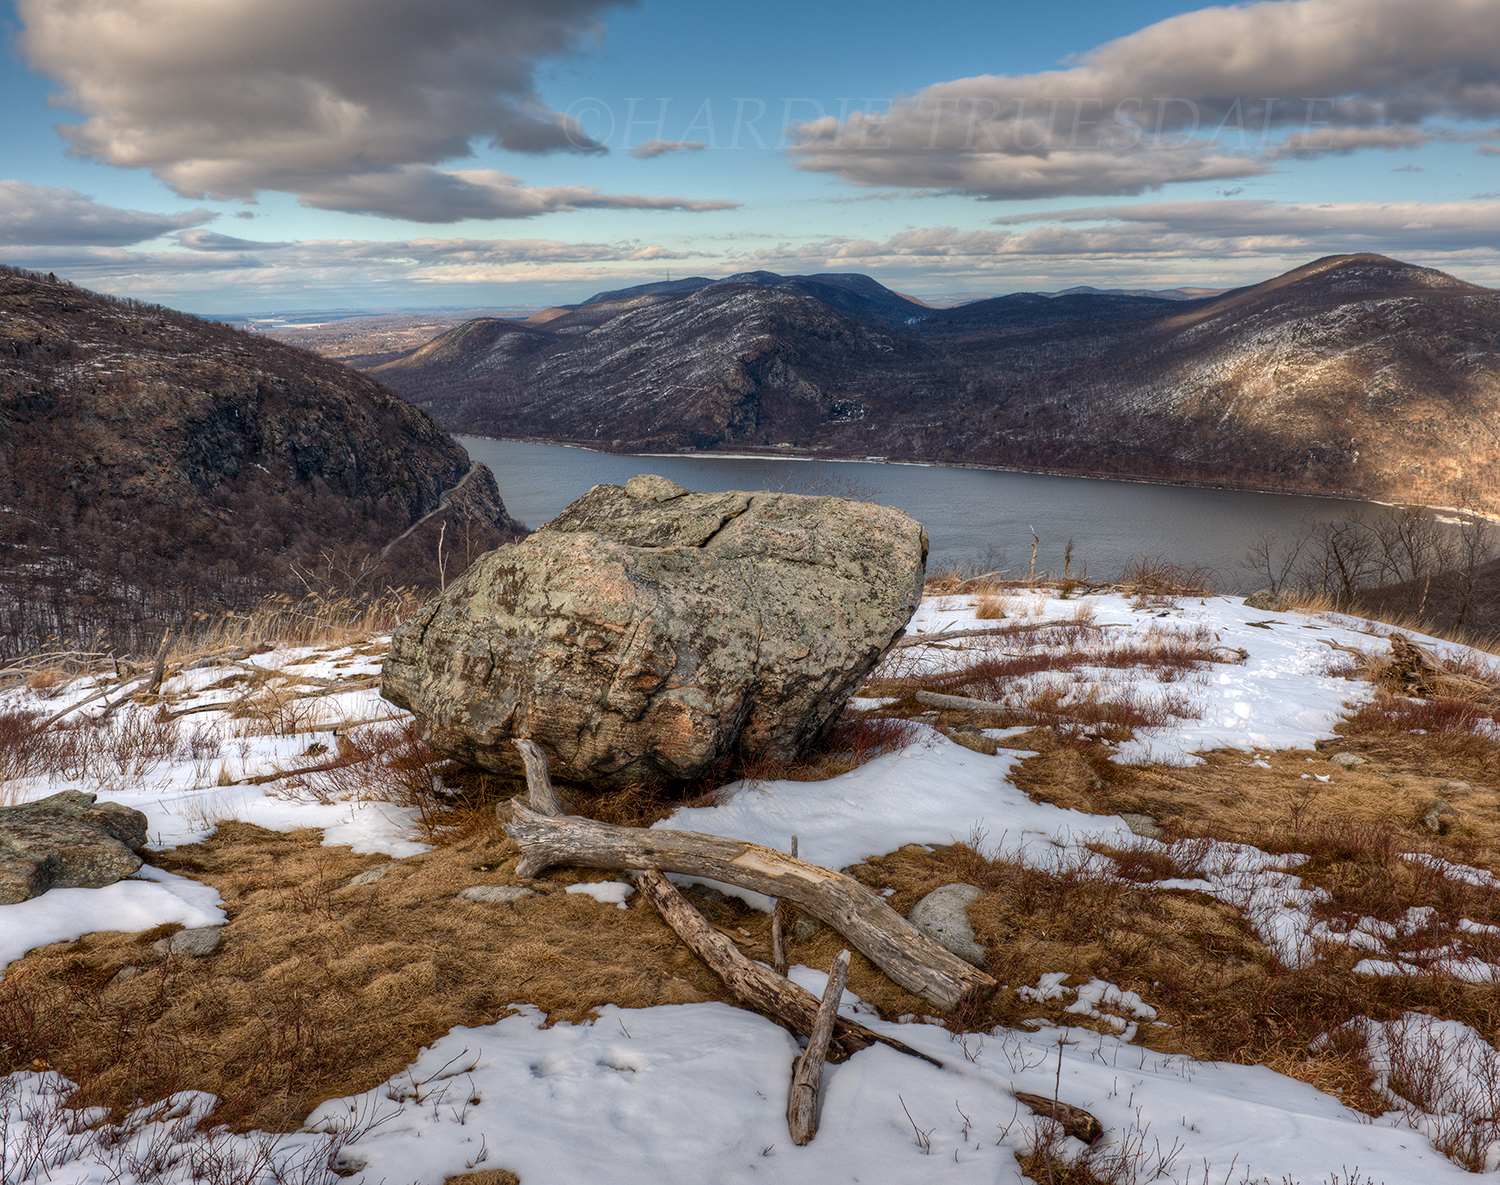 HR#247 "Storm King Narrows, North Point"